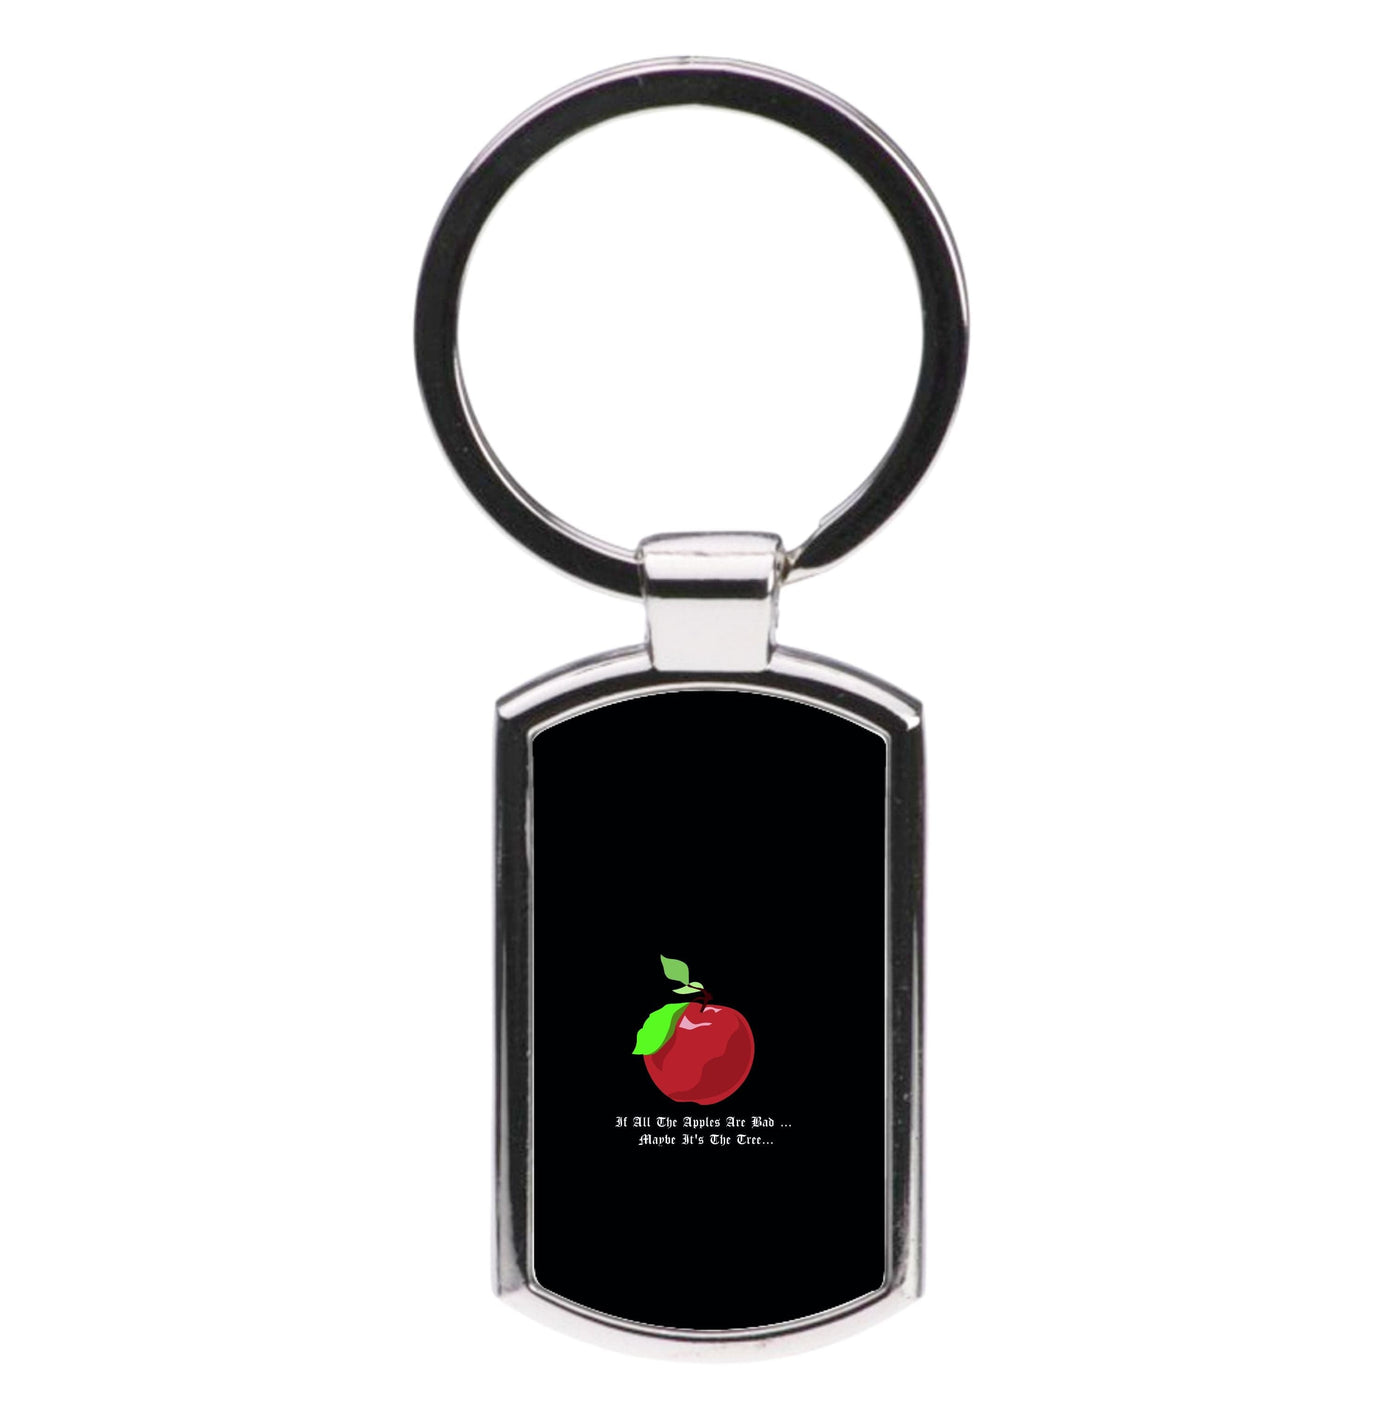 If All The Apples Are Bad - Lucifer Luxury Keyring